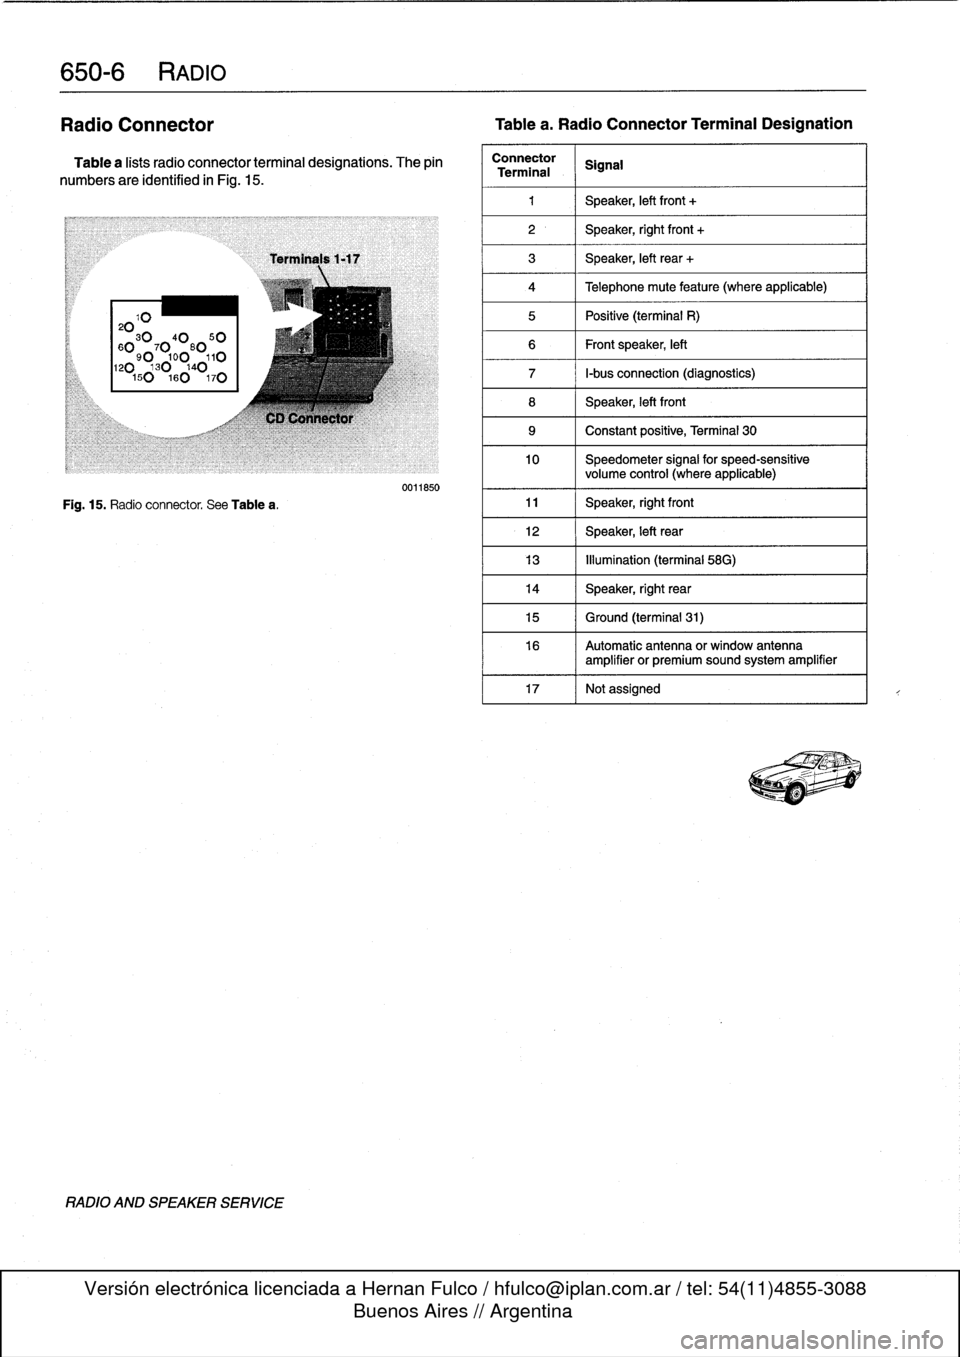 BMW M3 1994 E36 Workshop Manual 
650-
6
RADIO

Radio
Connector

	

Tablea
.
Radio
Connector
Terminal
Designation

Table
a
lists
radio
connector
terminal
designations
.
The
pin

numbers
are
identified
in
Fig
.
15
.

20103040
50

60
9